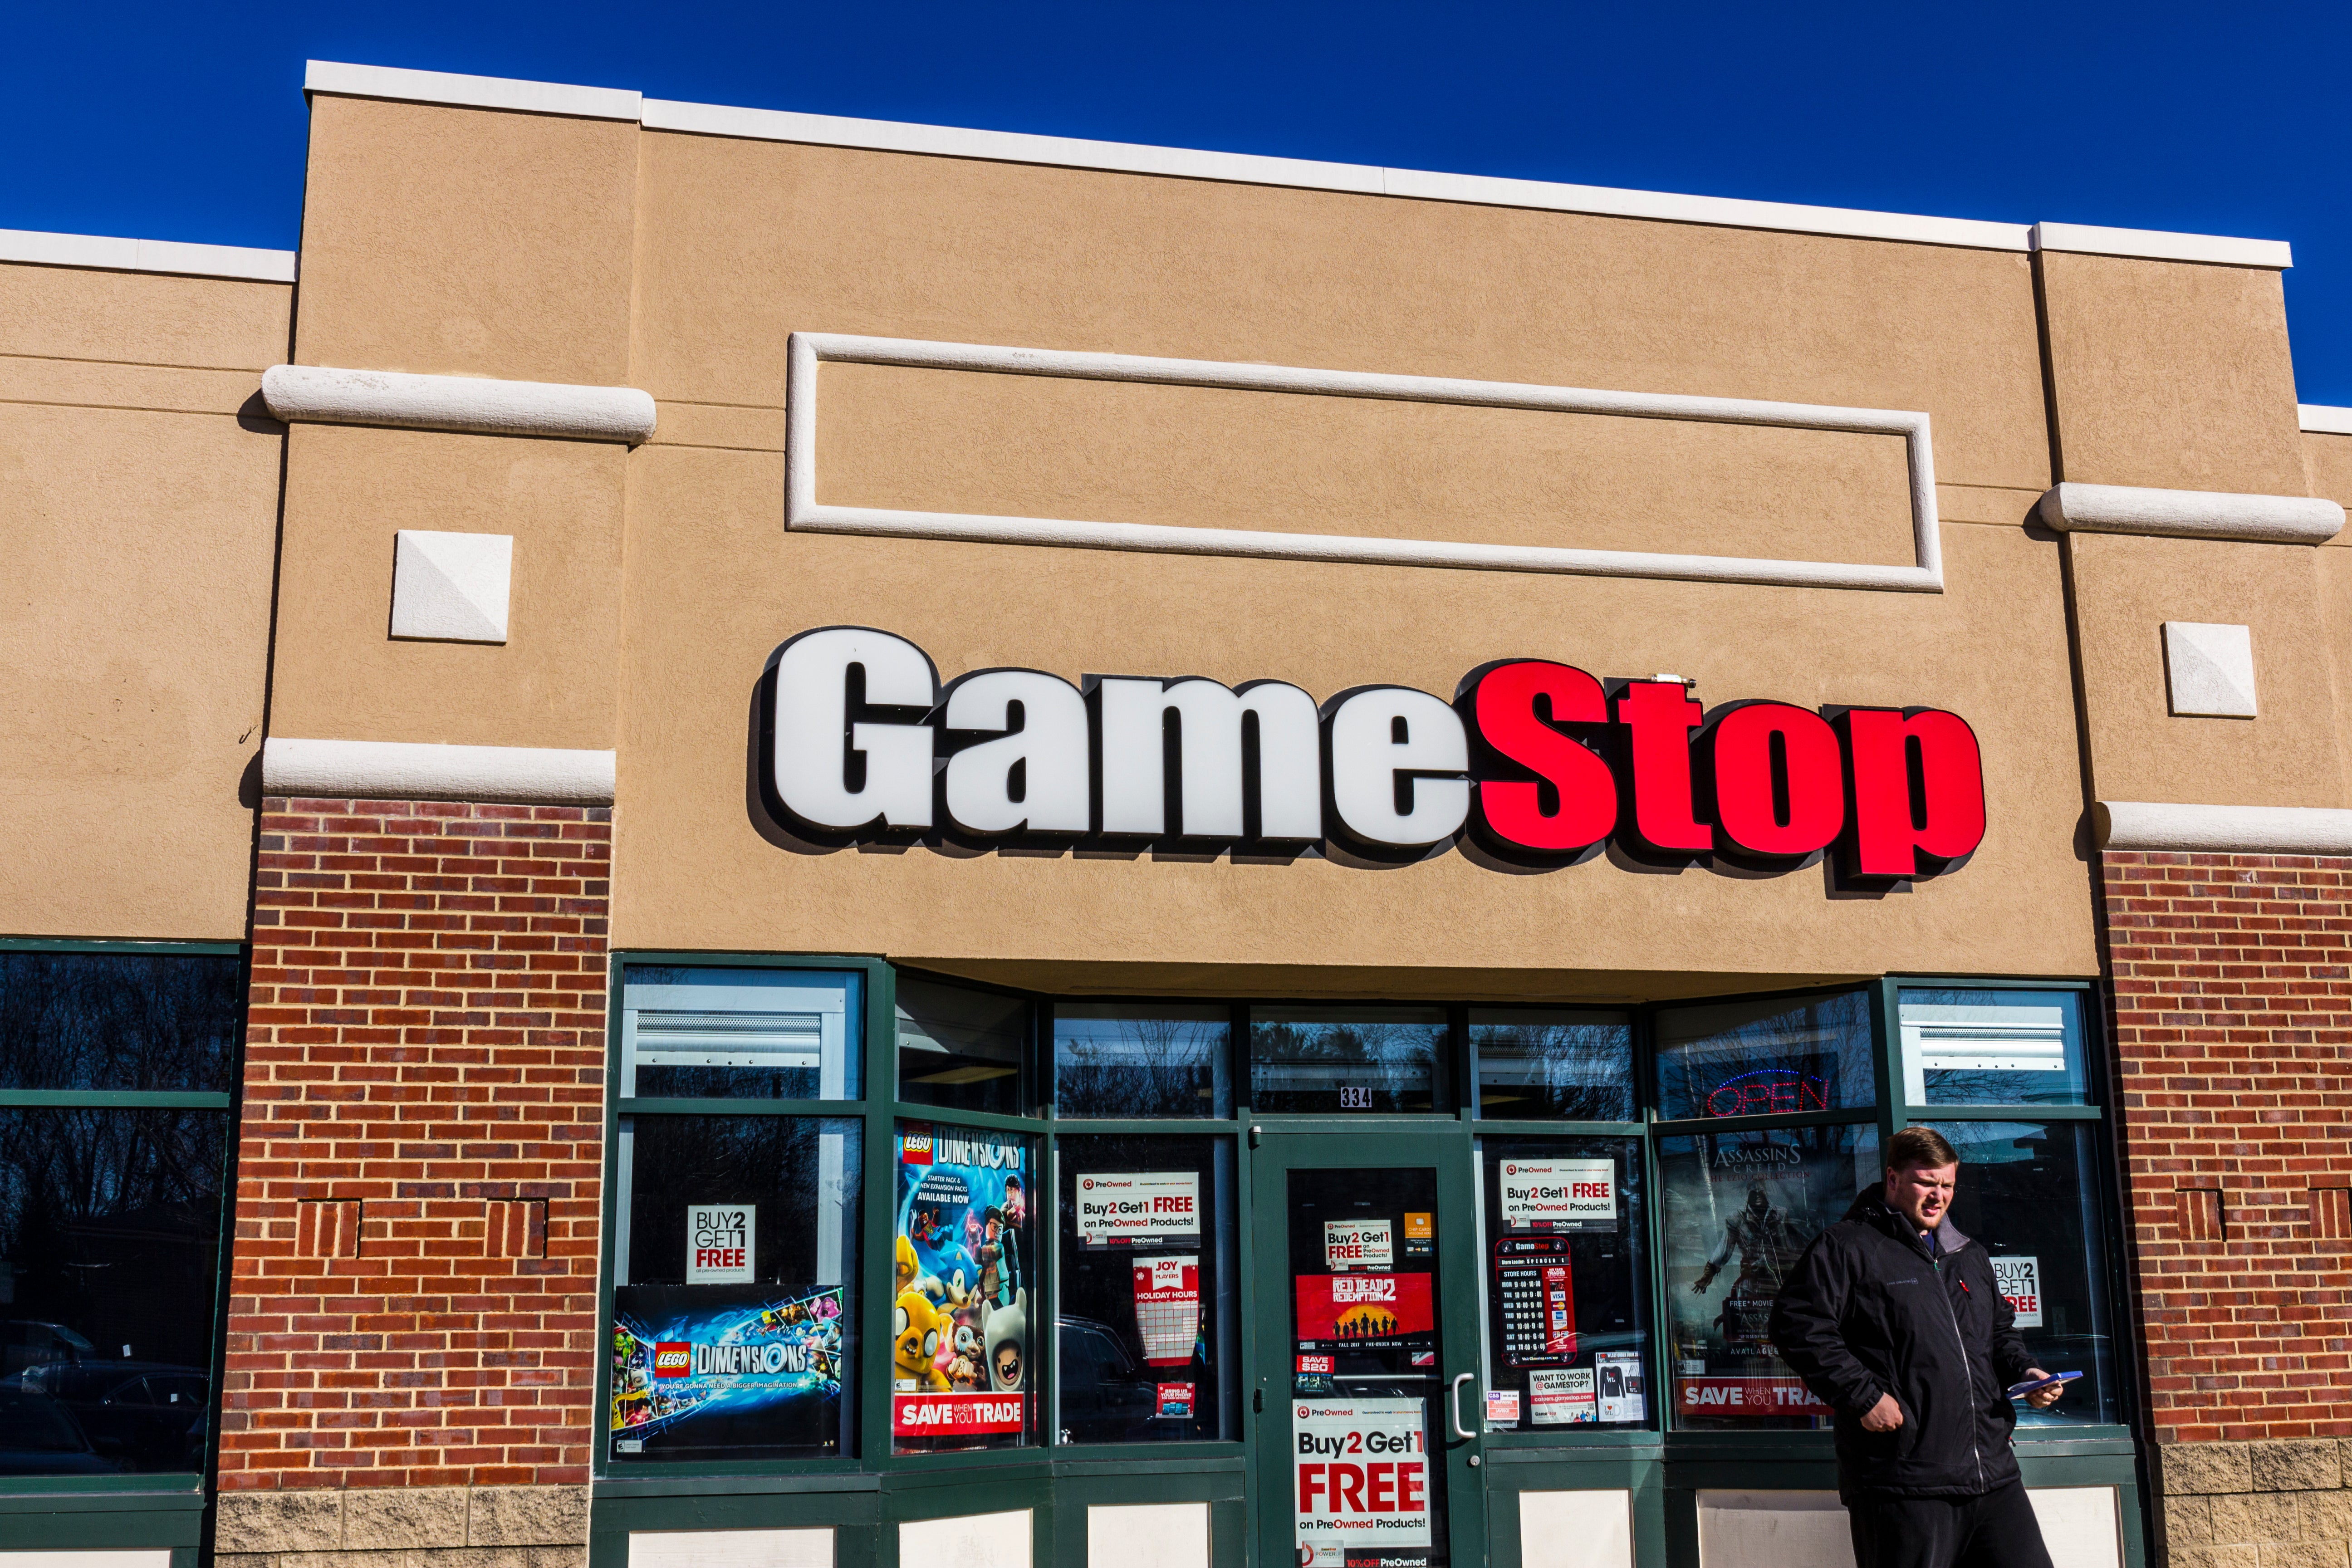 By acting in unison, amateur investors pushed up GameStop’s share price to astronomical levels causing massive losses for short-sellers